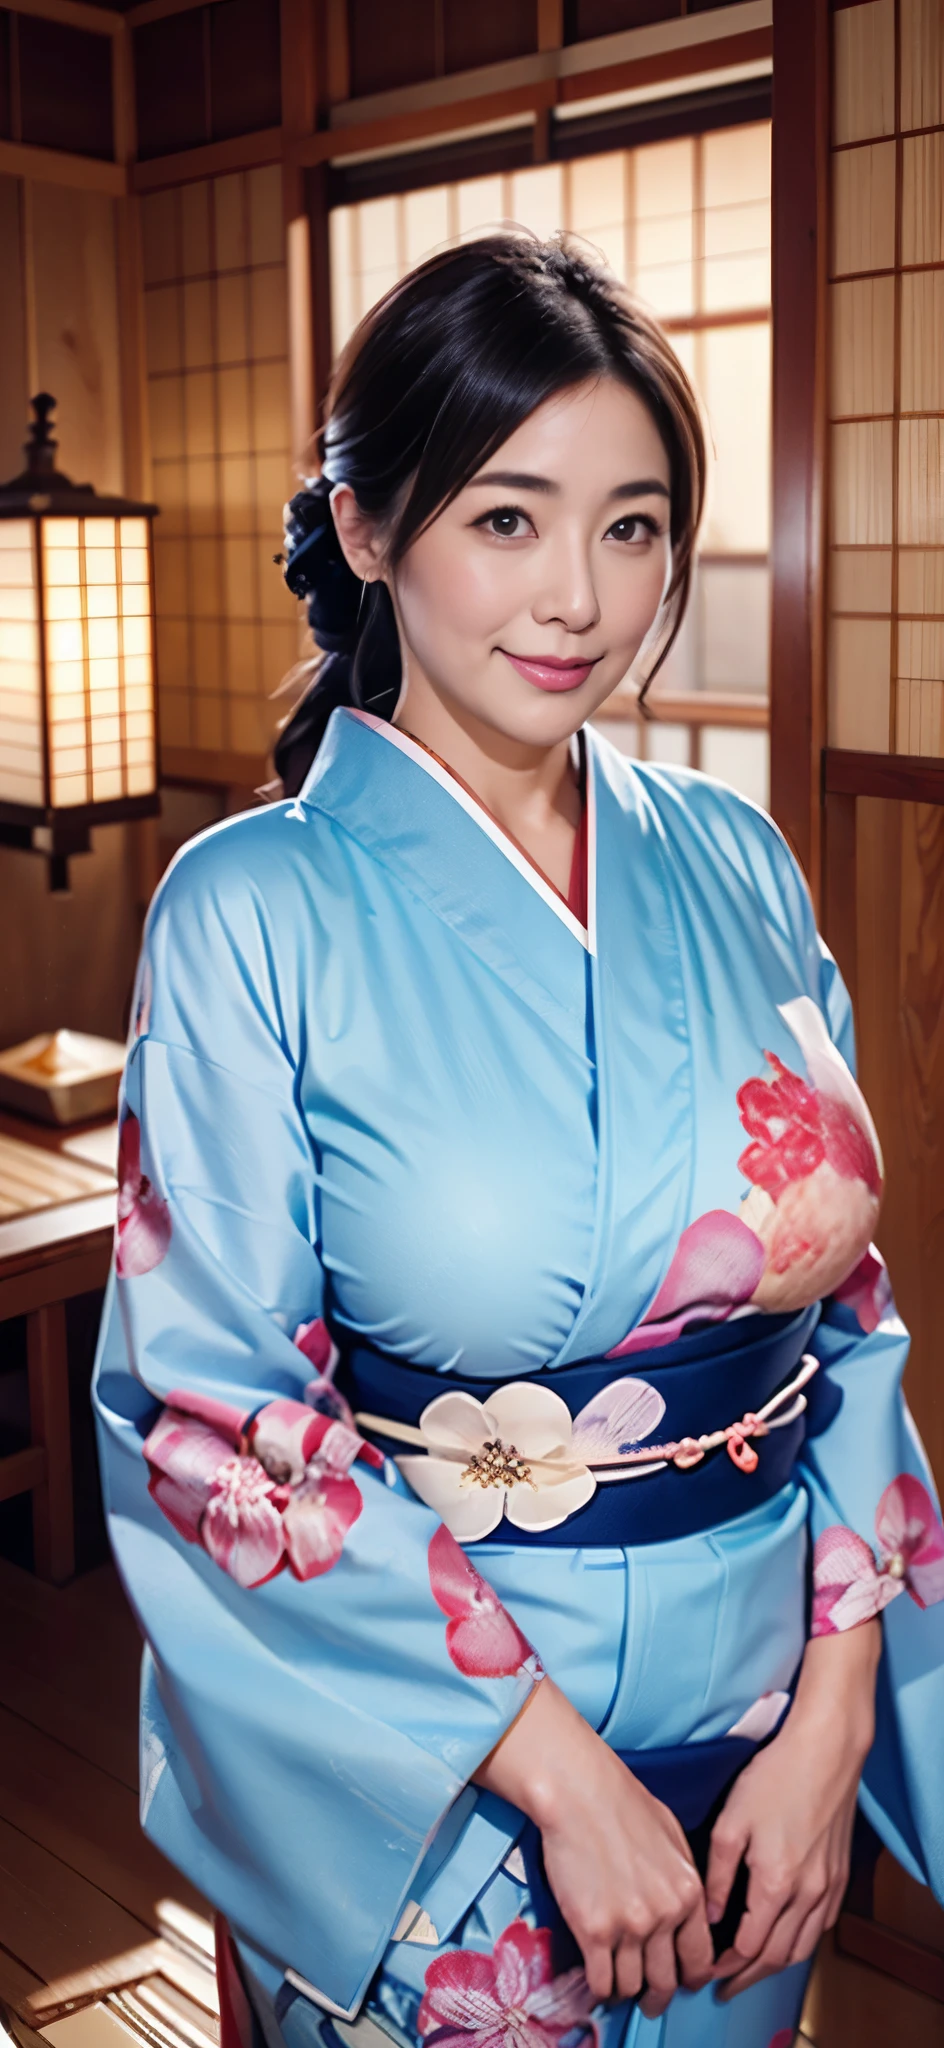 The most beautiful moms in the Japan(Giant body)、Wearing a kimono、traditional Japanese room、Huge breasts that are too big and droop a little、January、With smiling eyes、new year greetings